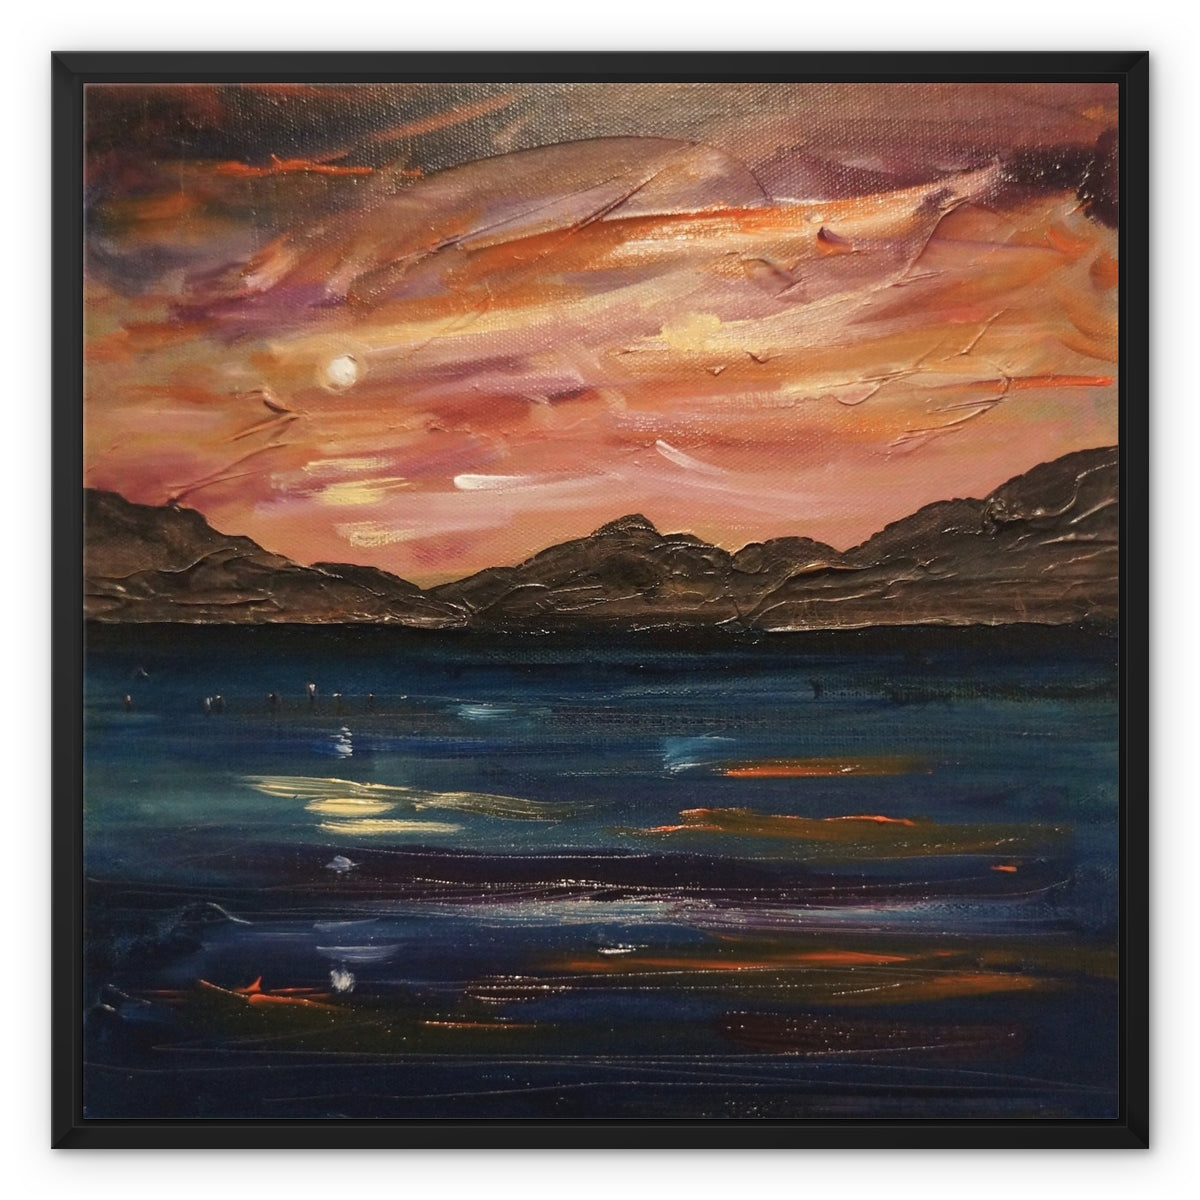 Loch Ness Moonset Painting | Framed Canvas From Scotland-Floating Framed Canvas Prints-Scottish Lochs & Mountains Art Gallery-24"x24"-Paintings, Prints, Homeware, Art Gifts From Scotland By Scottish Artist Kevin Hunter